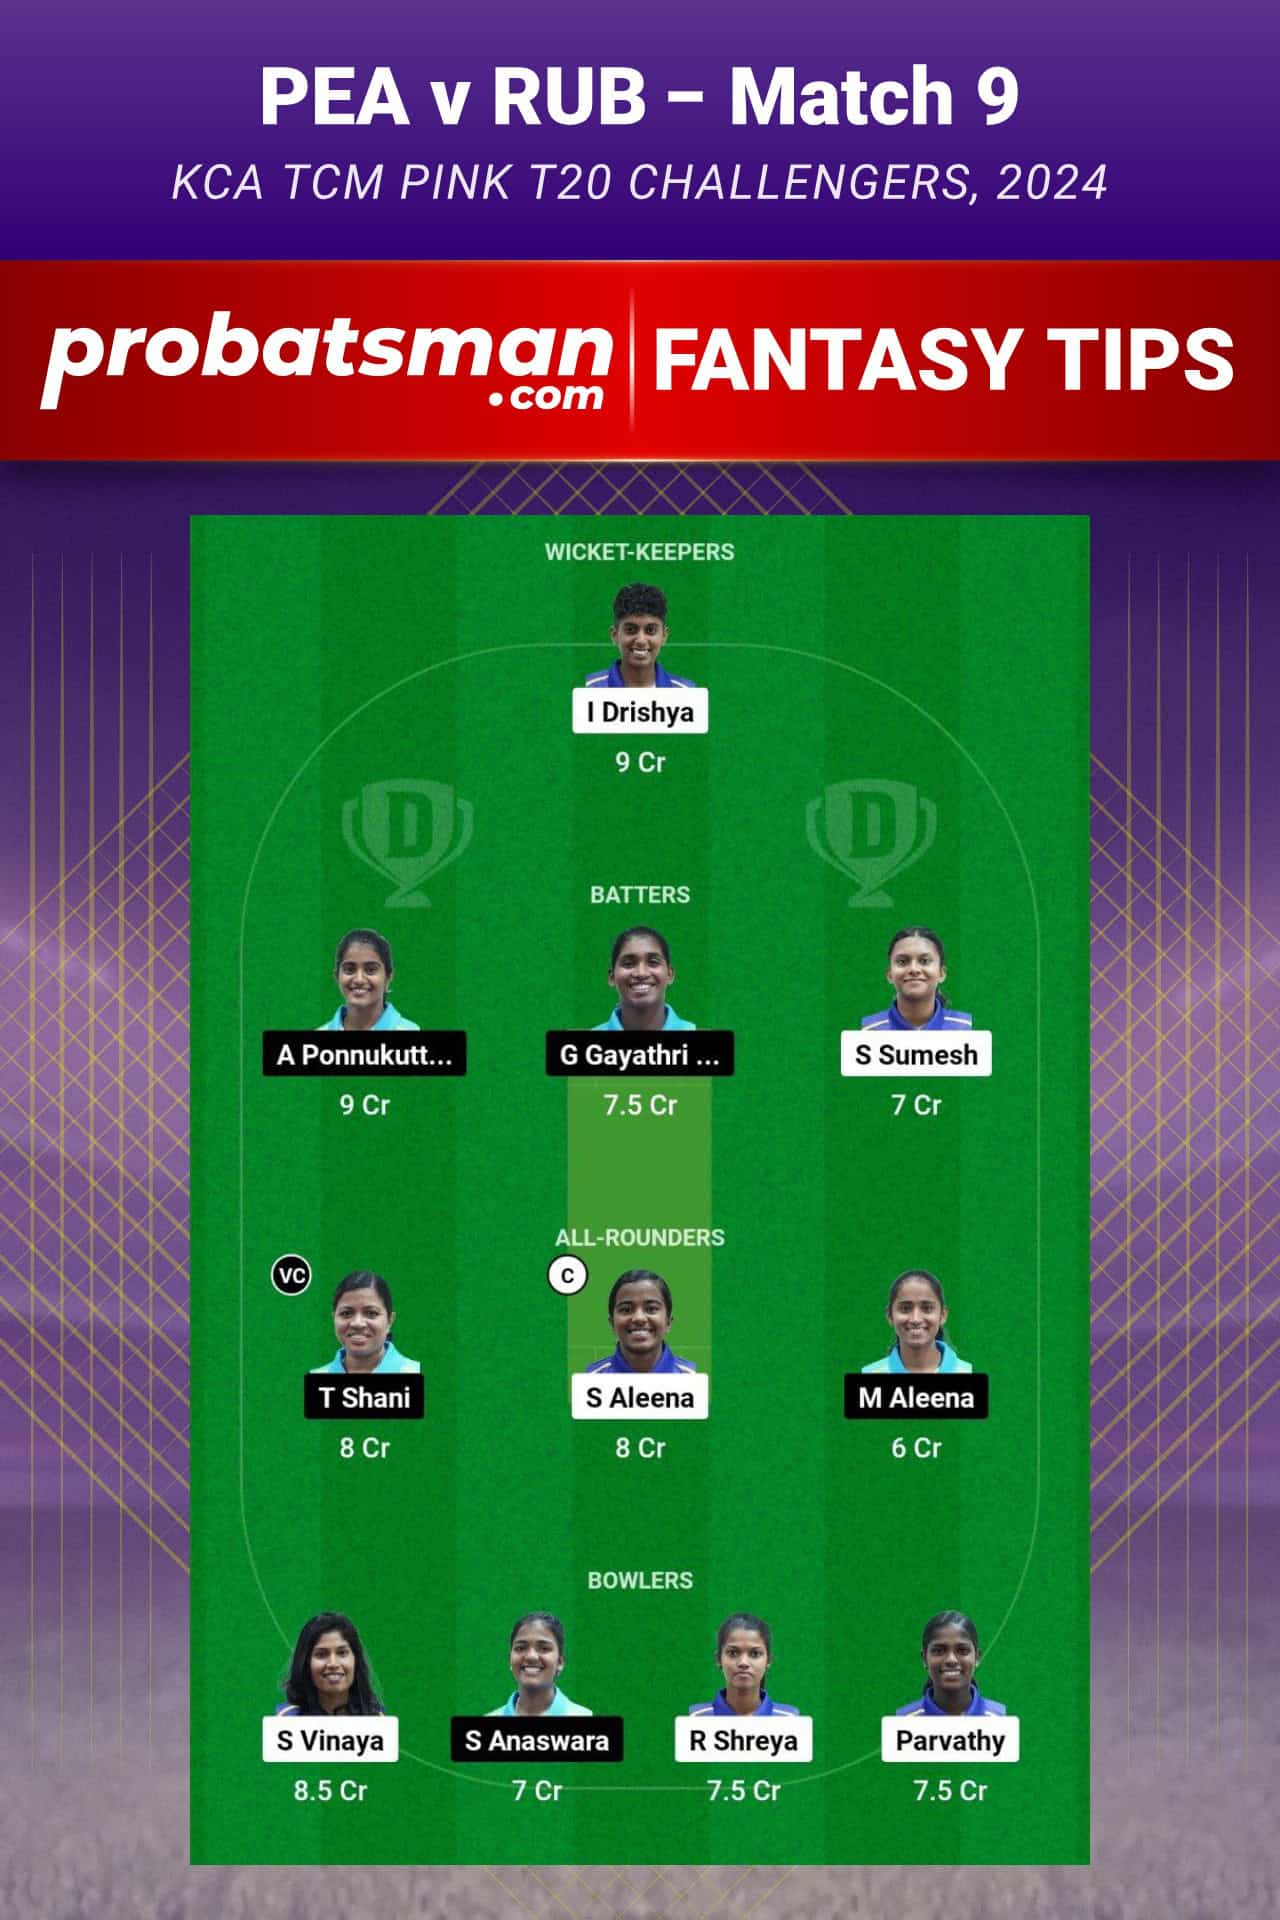 PEA vs RUB Dream11 Prediction for Match 9 of KCA TCM Pink T20 Challengers 2024